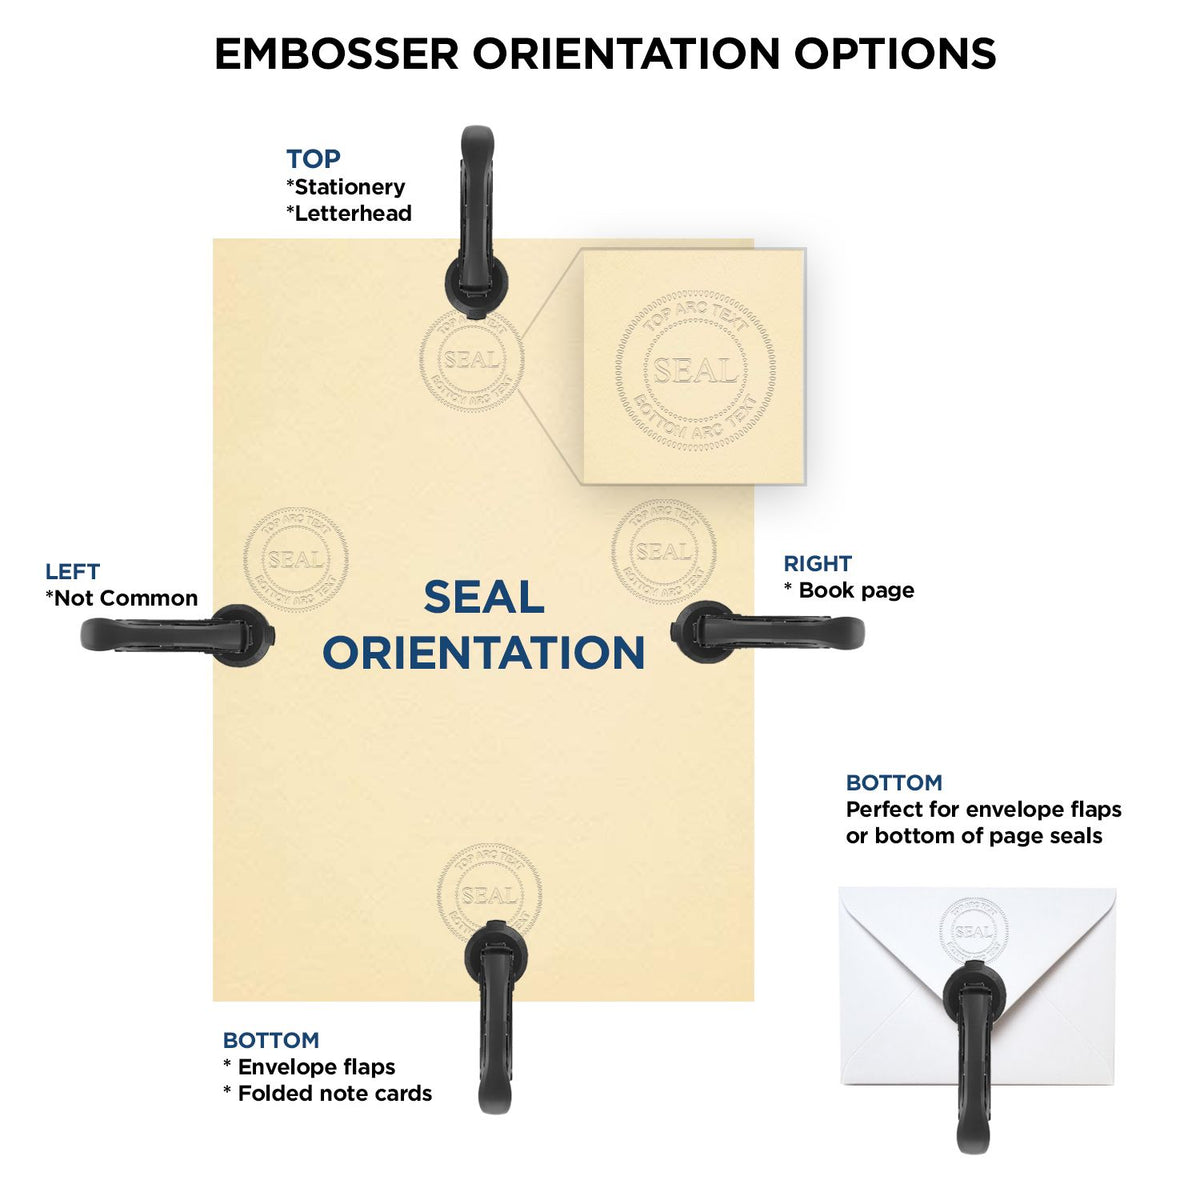 An infographic for the Heavy Duty Cast Iron Louisiana Geologist Seal Embosser showing embosser orientation, this is showing examples of a top, bottom, right and left insert.